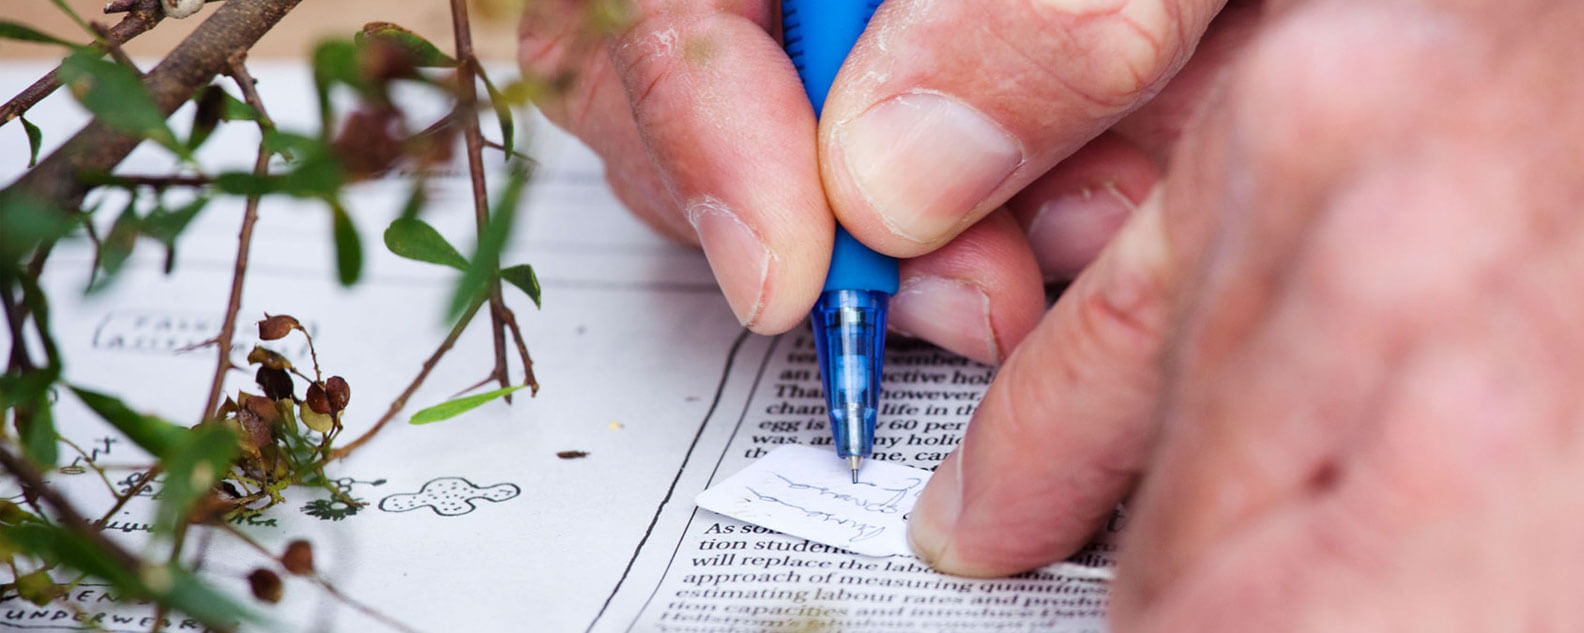 A scientist writing notes on a small piece of paper.